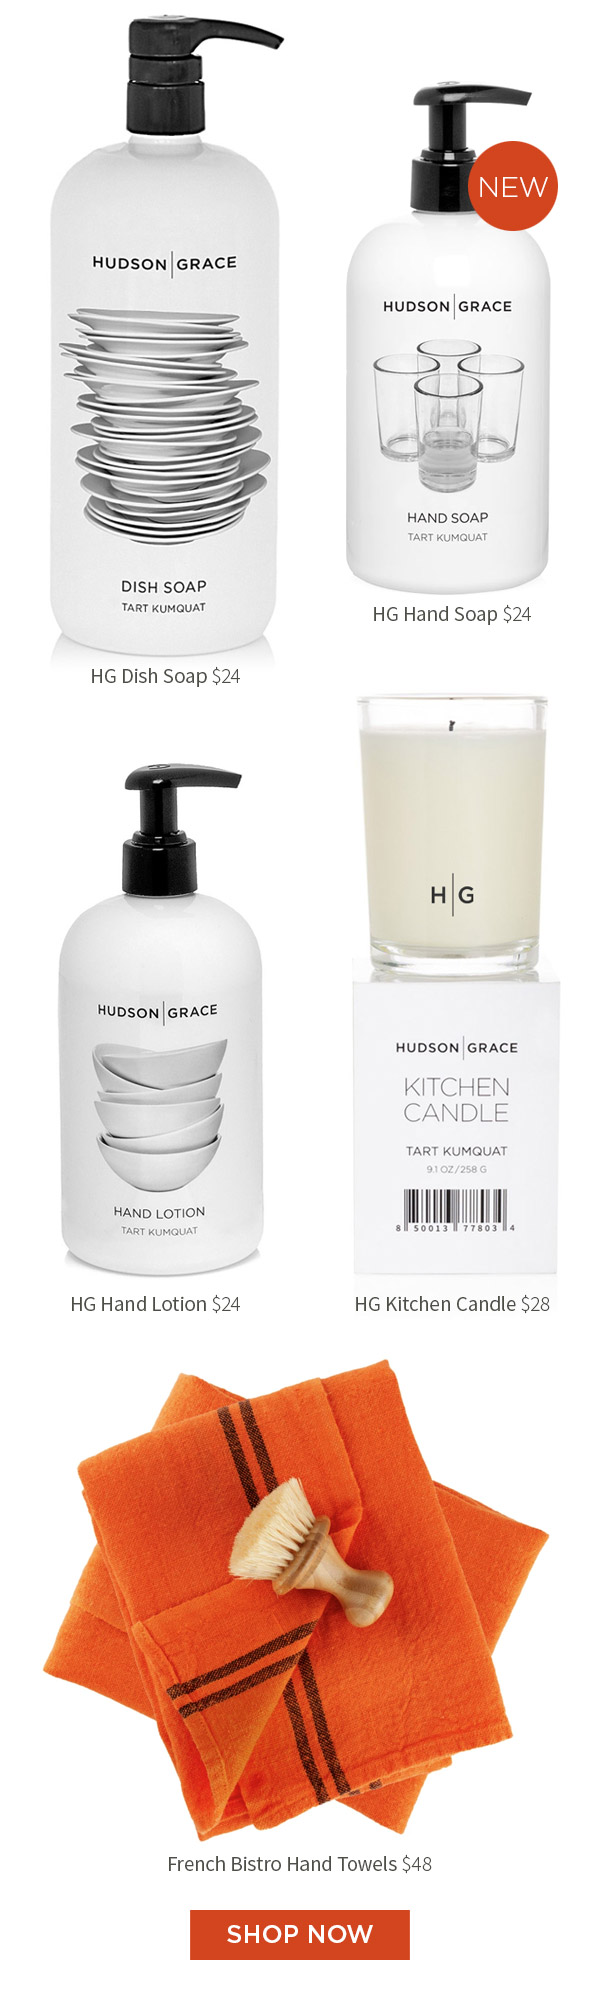 HG Dish Soap $24 .?HG Hand Soap $24 .?HG Hand Lotion $24 .?HG Kitchen Candle $28 .?French Bistro Hand Towels $48